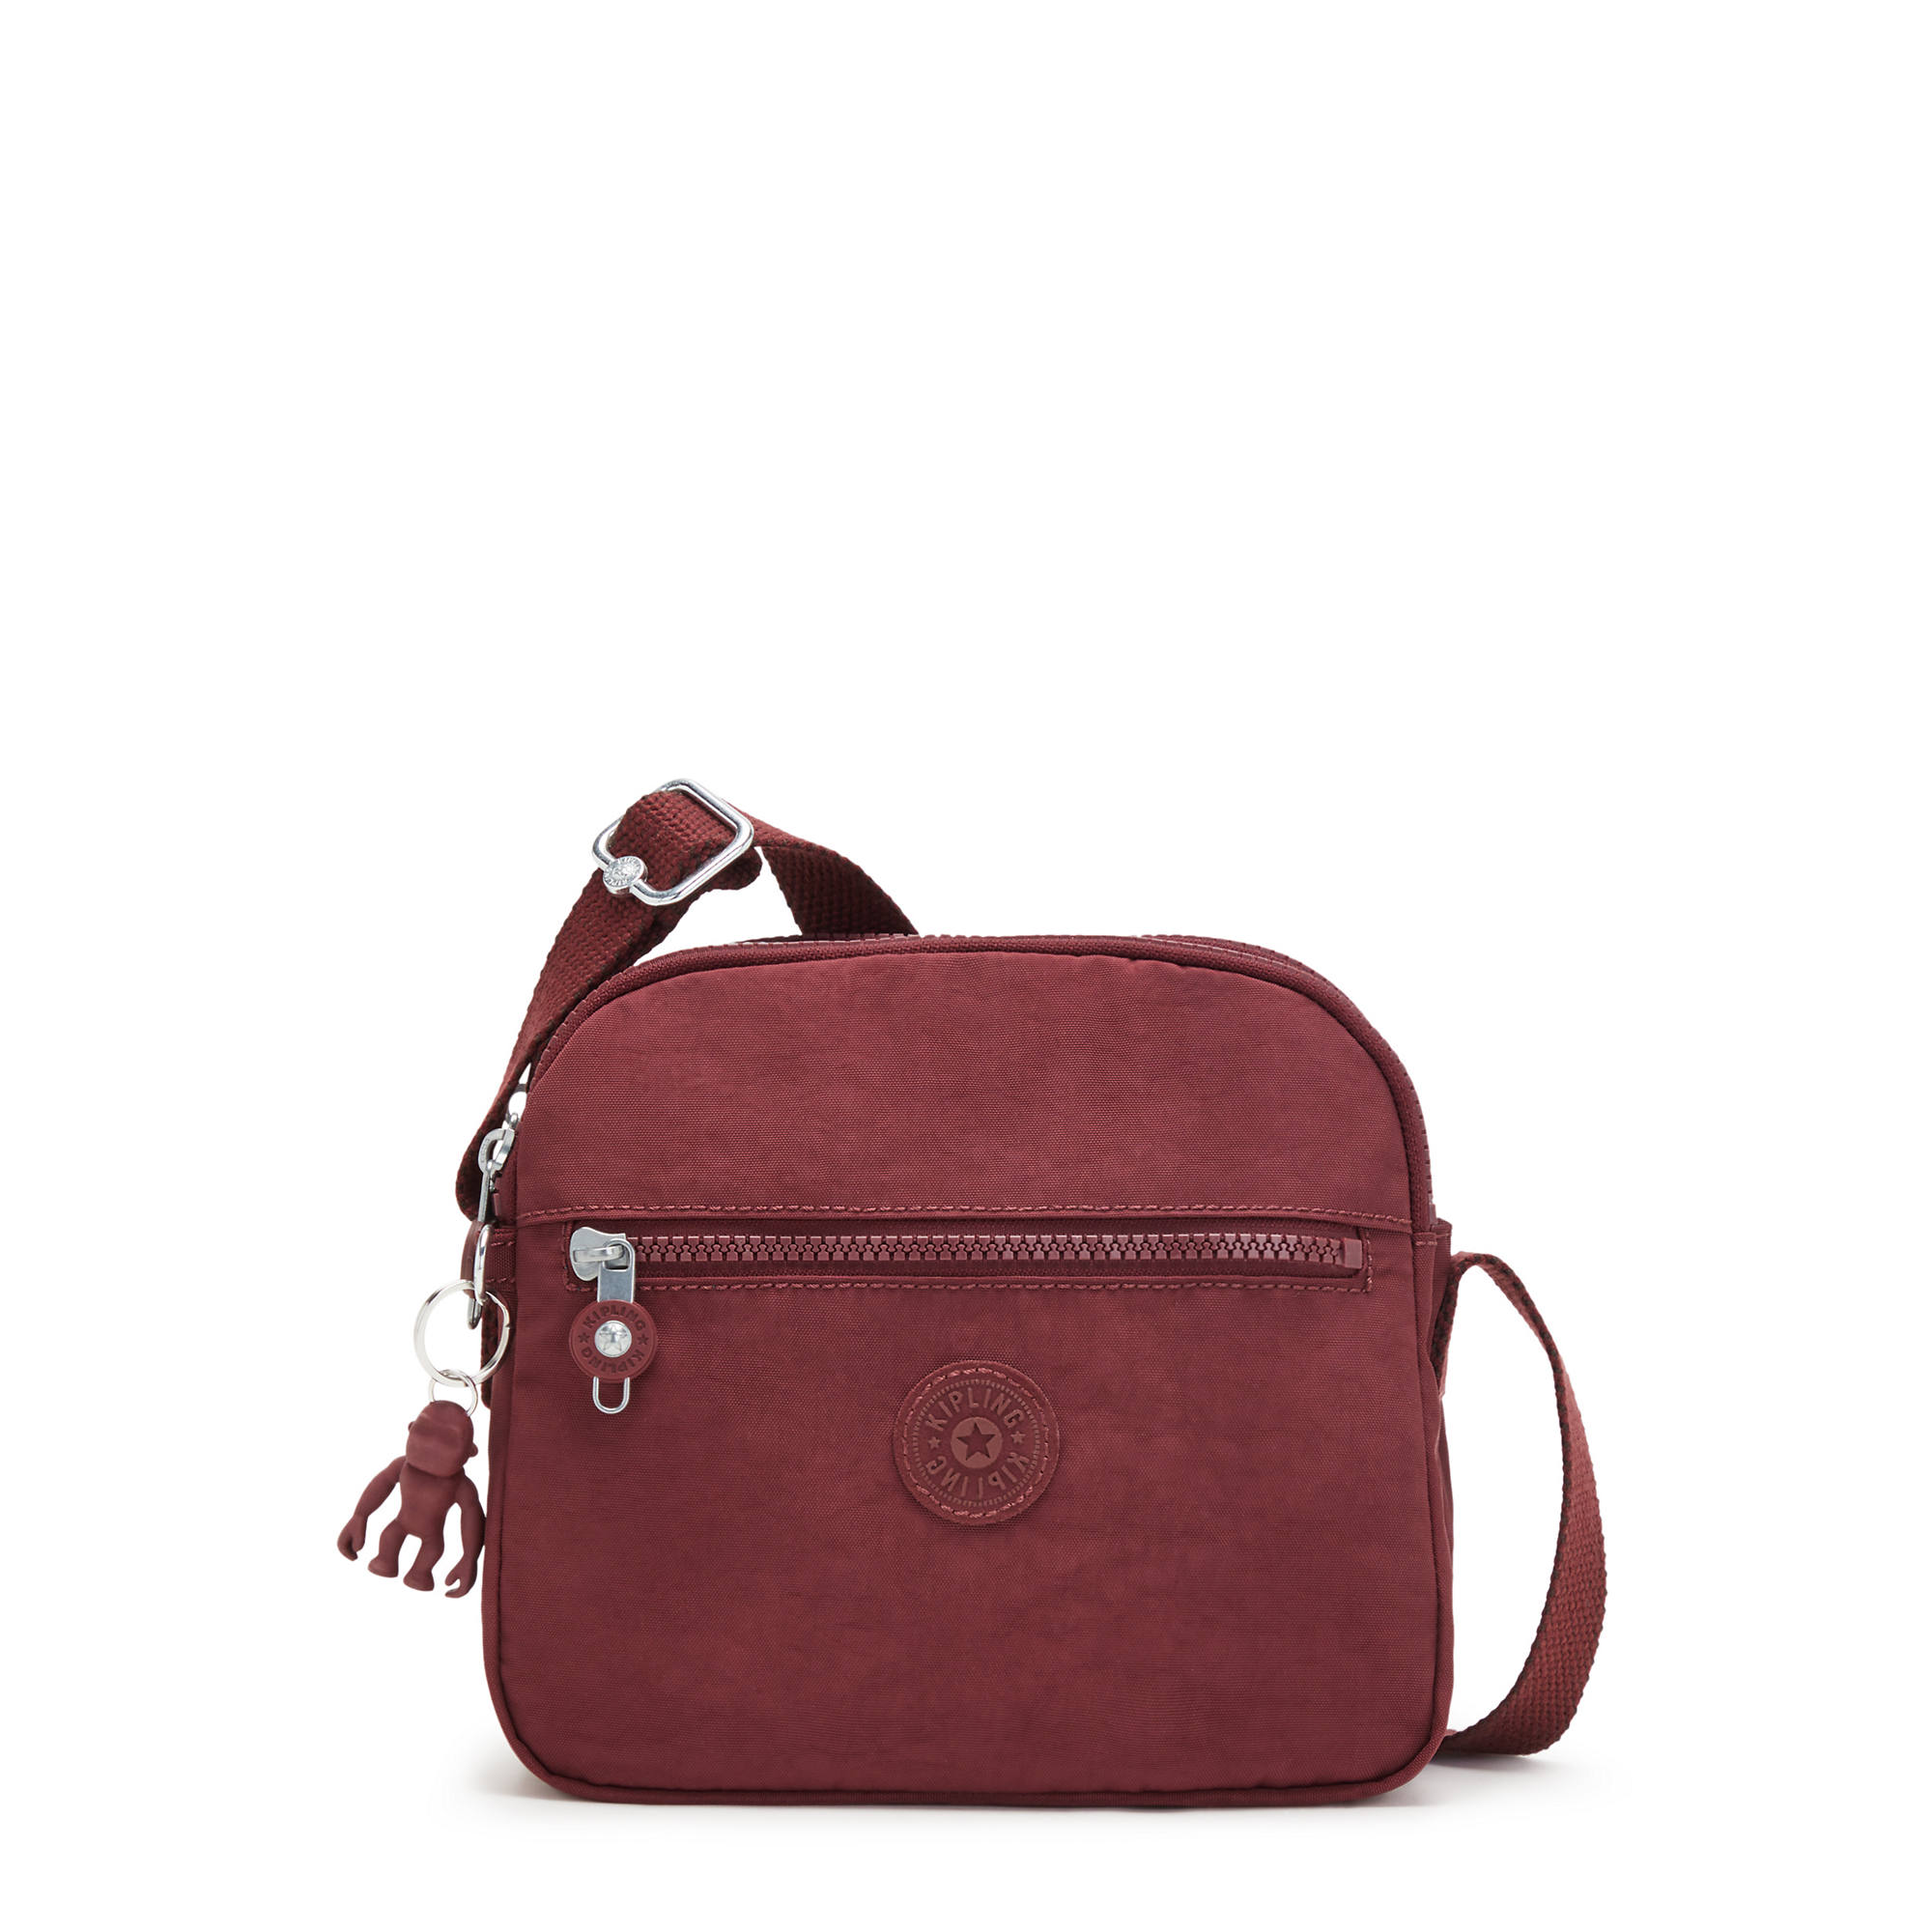 Brielle Red Woven Crossbody Bag – LUX USA